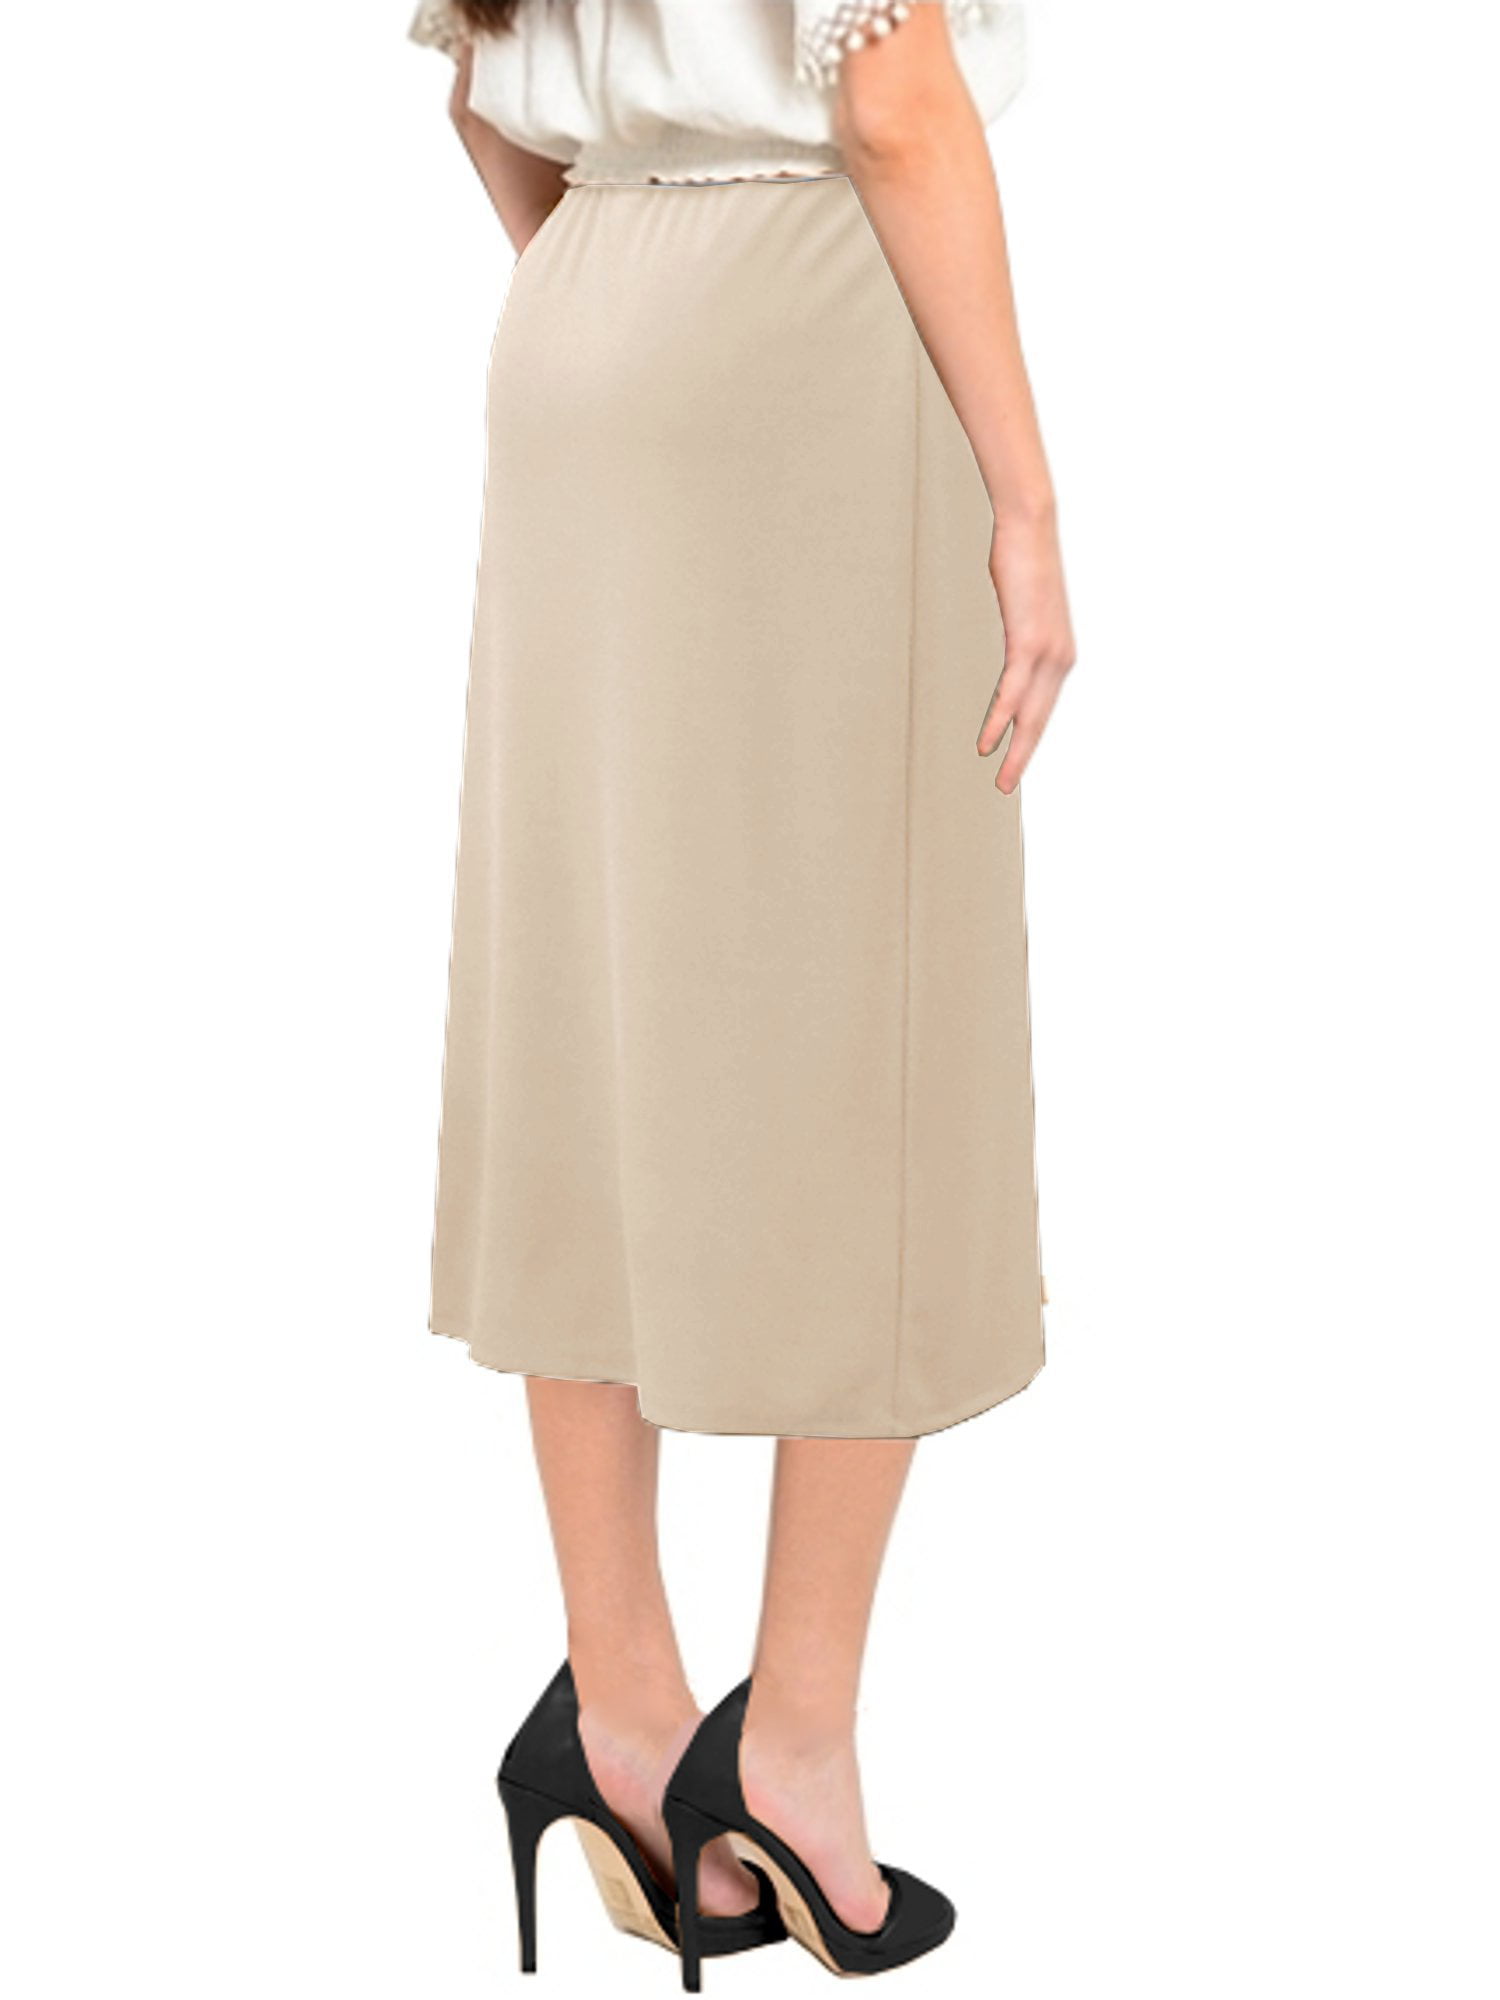 Baby'O Women's Basic Modest 26 Below The Knee Length Stretch Knit Straight Skirt 